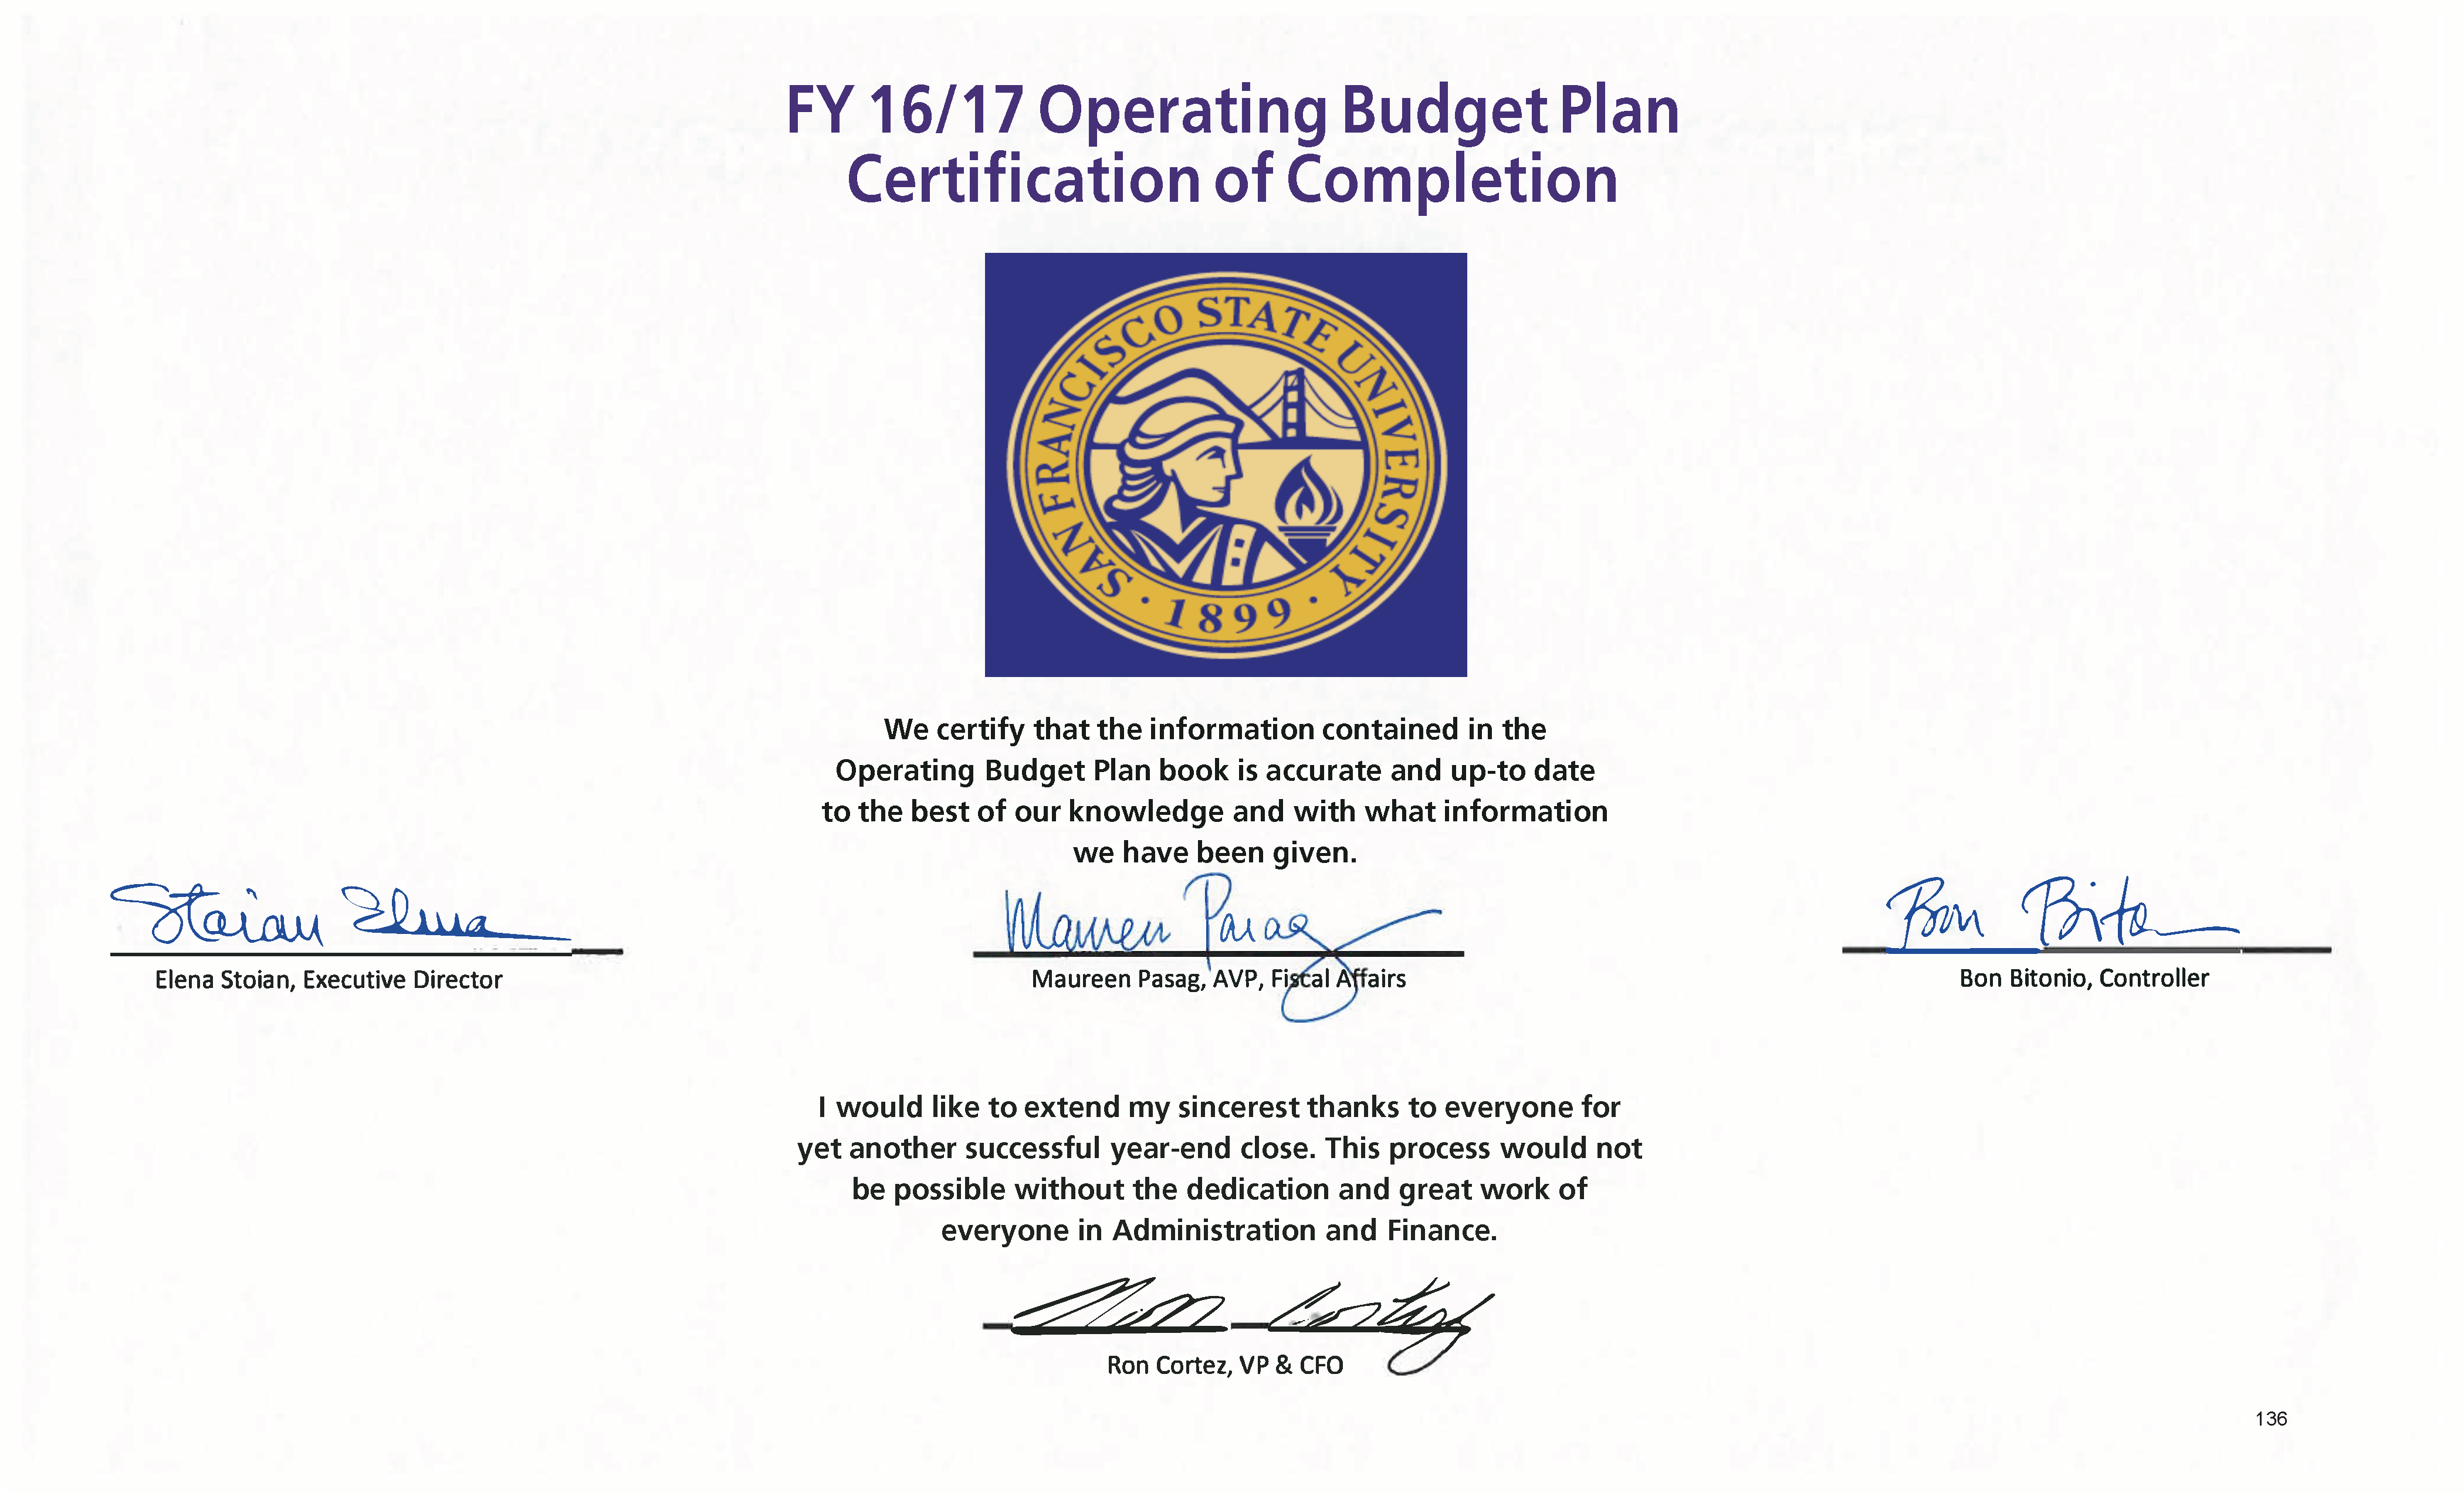 FY 16/17 Operating Budget Plan Certification of Completion